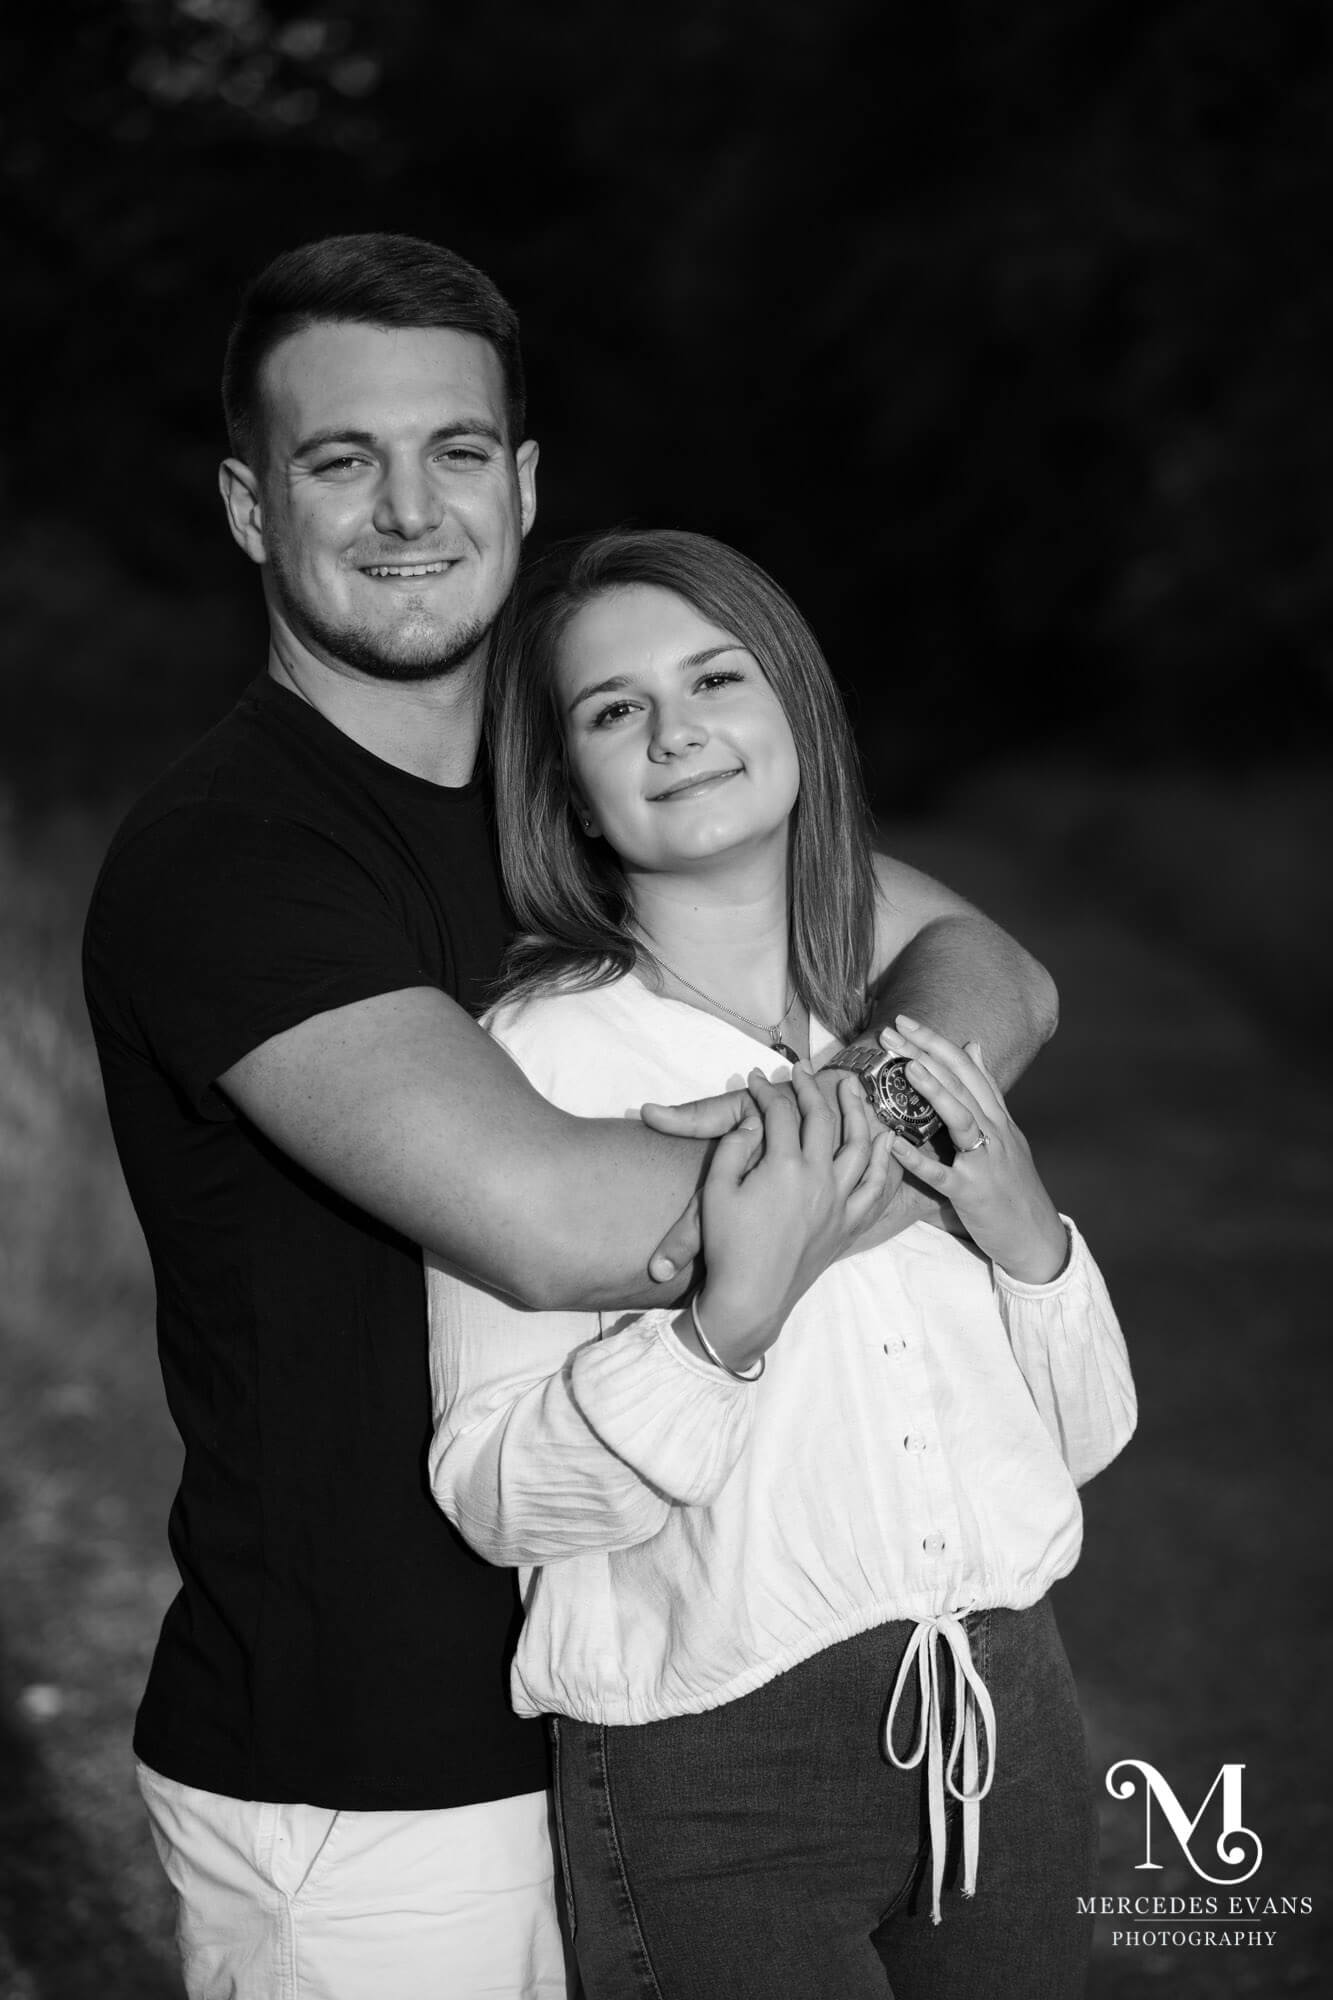 black and white image of a young man embracing a young woman, both of them are looking forward and smiling